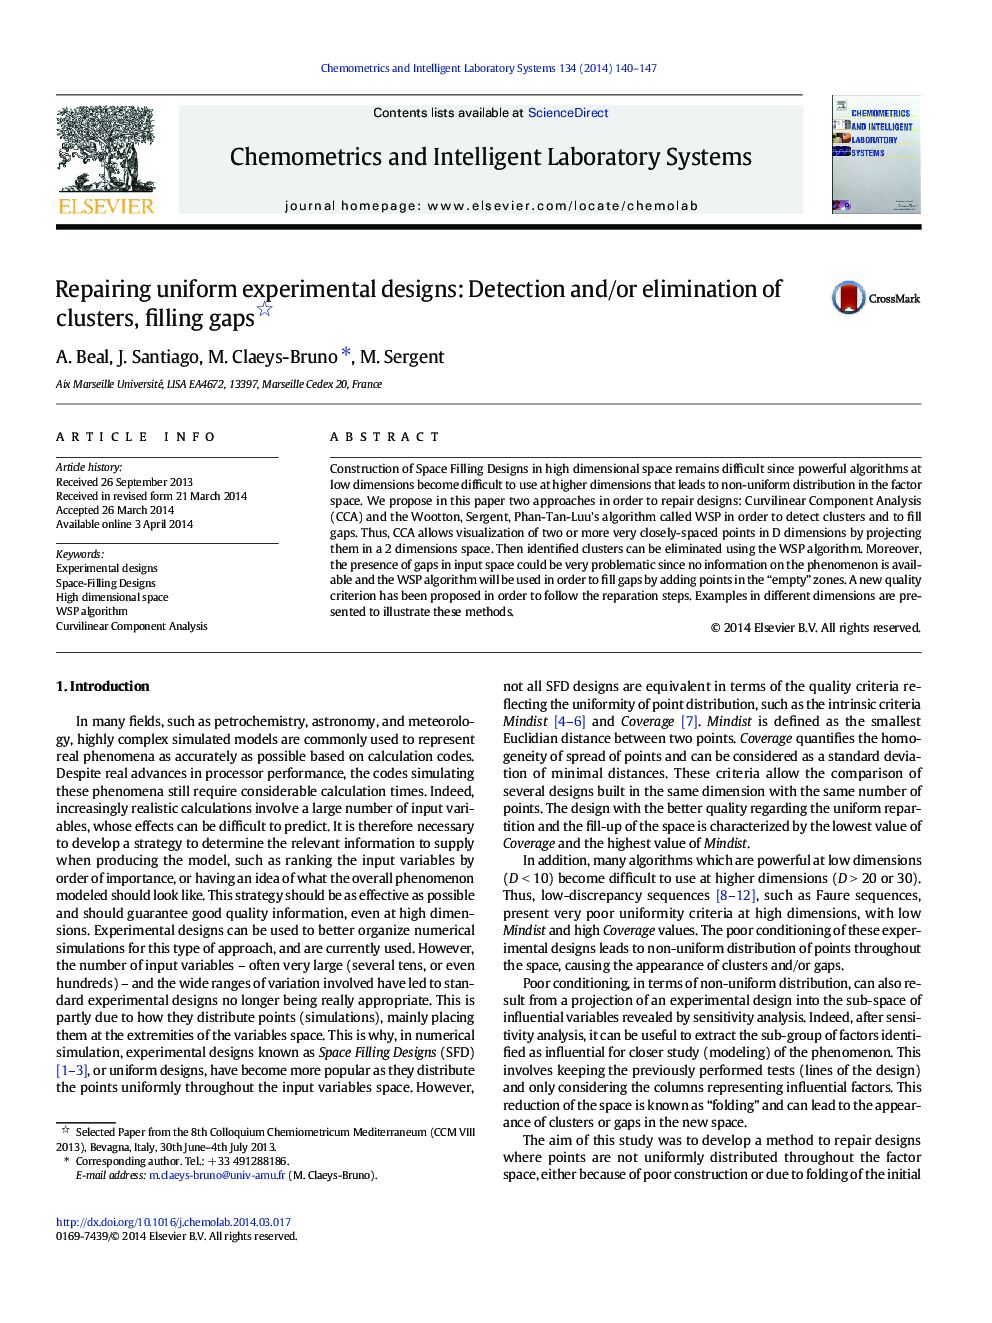 Repairing uniform experimental designs: Detection and/or elimination of clusters, filling gaps